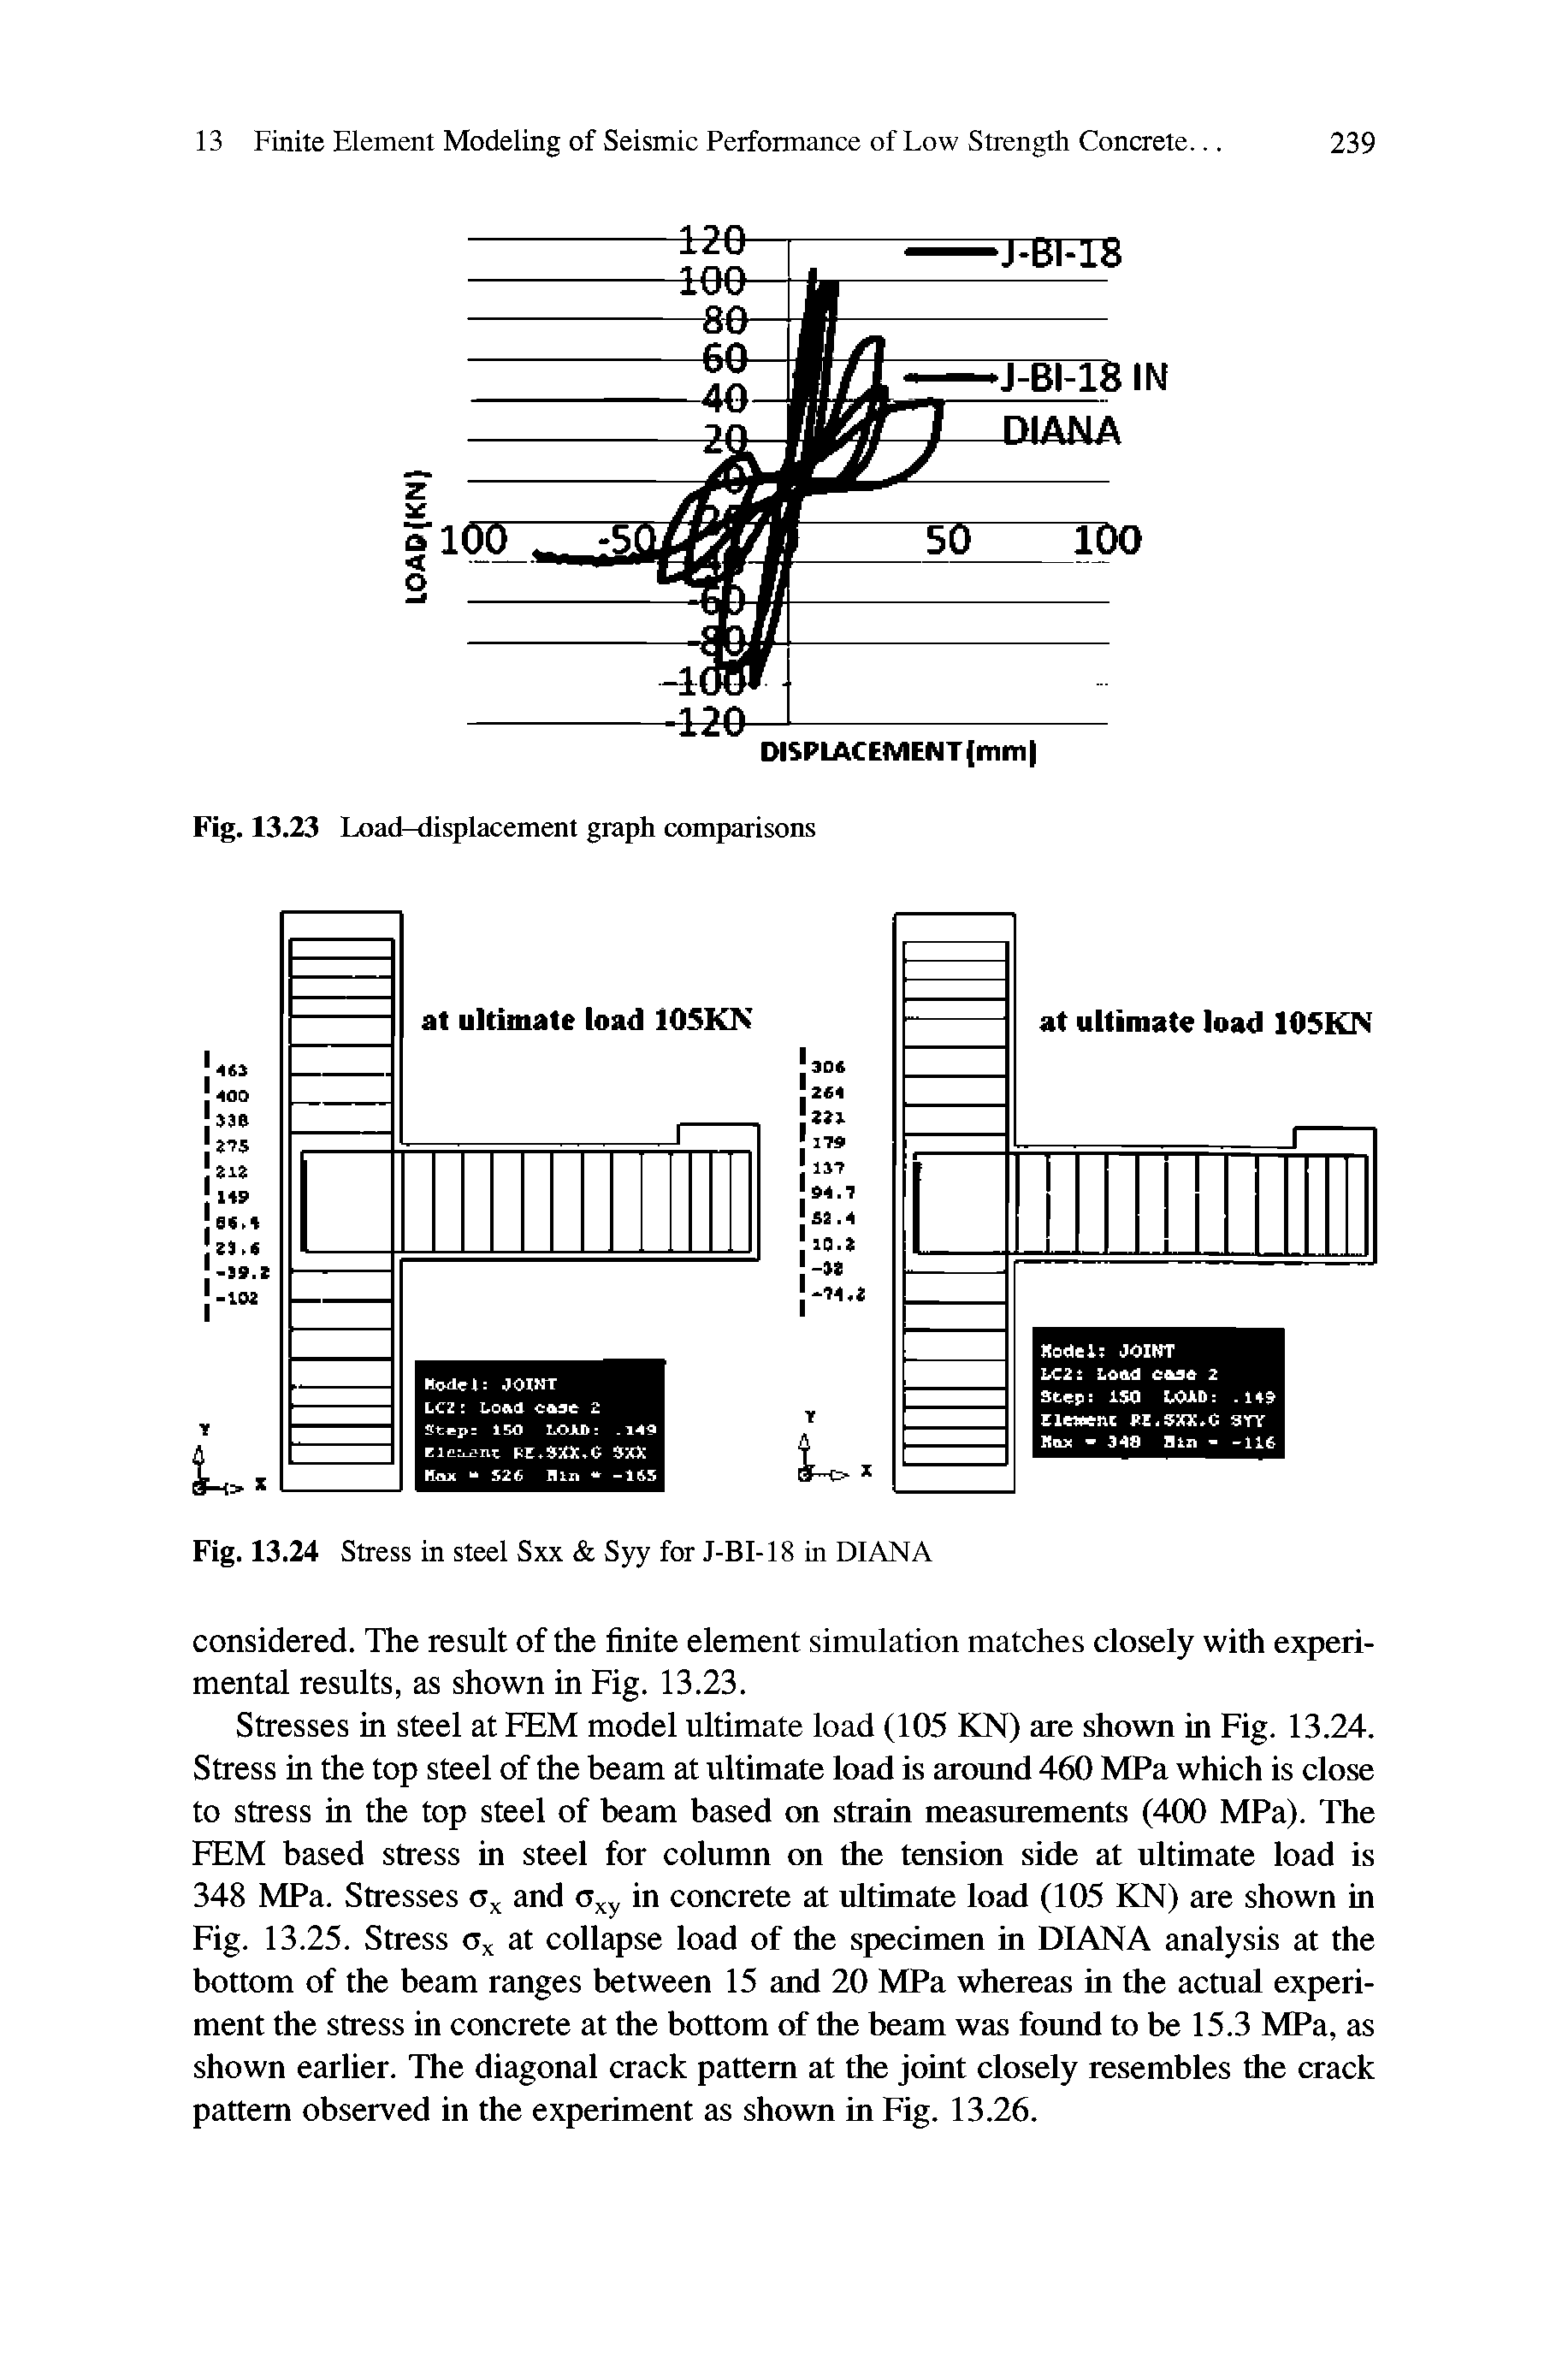 Fig. 13.25. Stress Ox at collapse load of the specimen in DIANA analysis at the bottom of the beam ranges between 15 and 20 MPa whereas in the actual experiment the stress in concrete at the bottom of the beam was found to be 15.3 MPa, as shown earlier. The diagonal crack pattern at the joint closely resembles the crack pattern observed in the experiment as shown in Fig. 13.26.